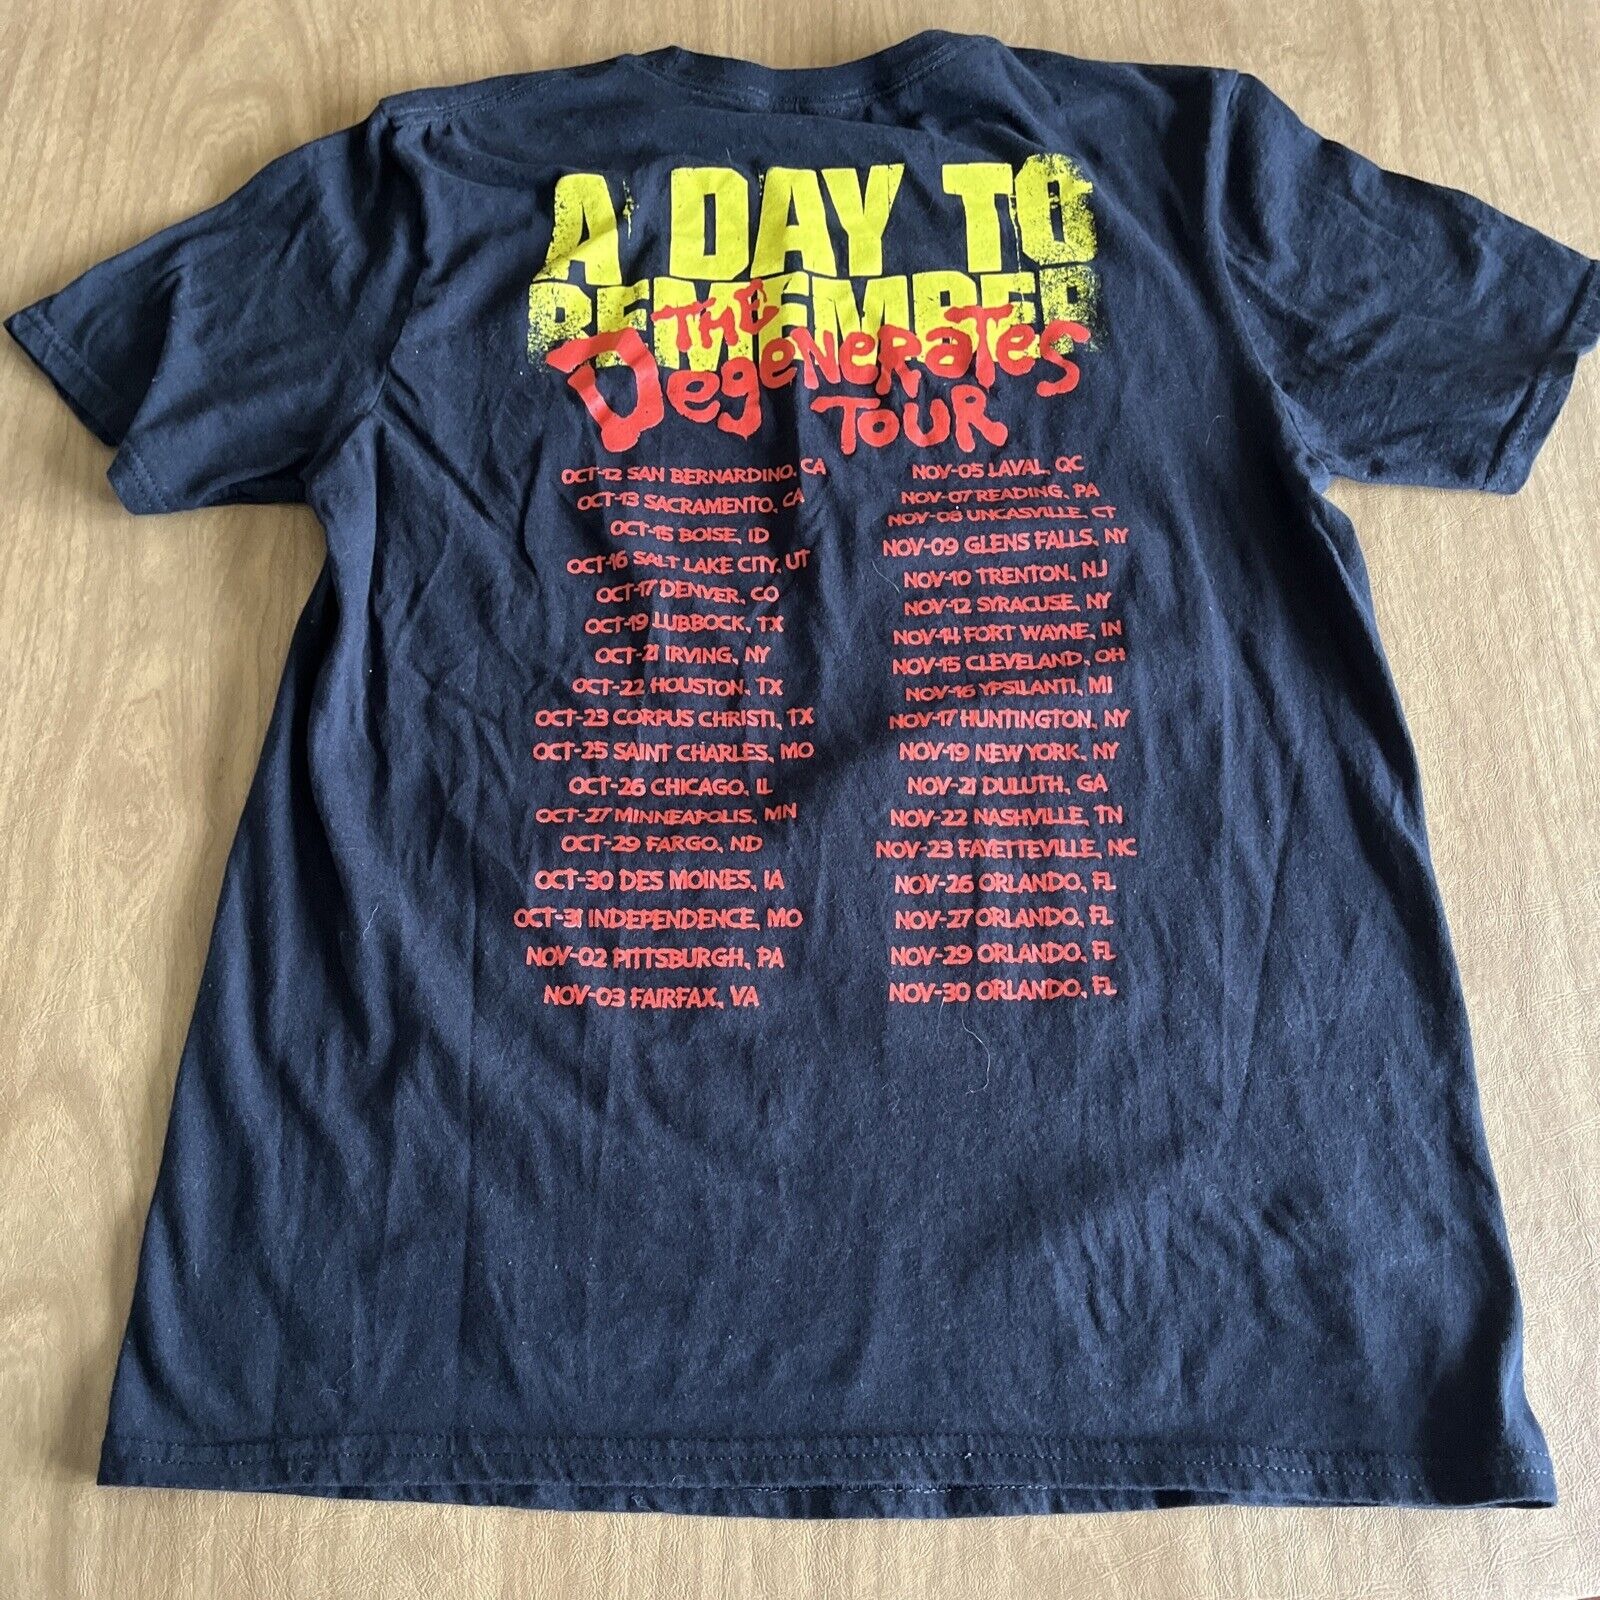 A Day To Remember The Degenerates Tour 2019 Adult T-shirt Concert Rock